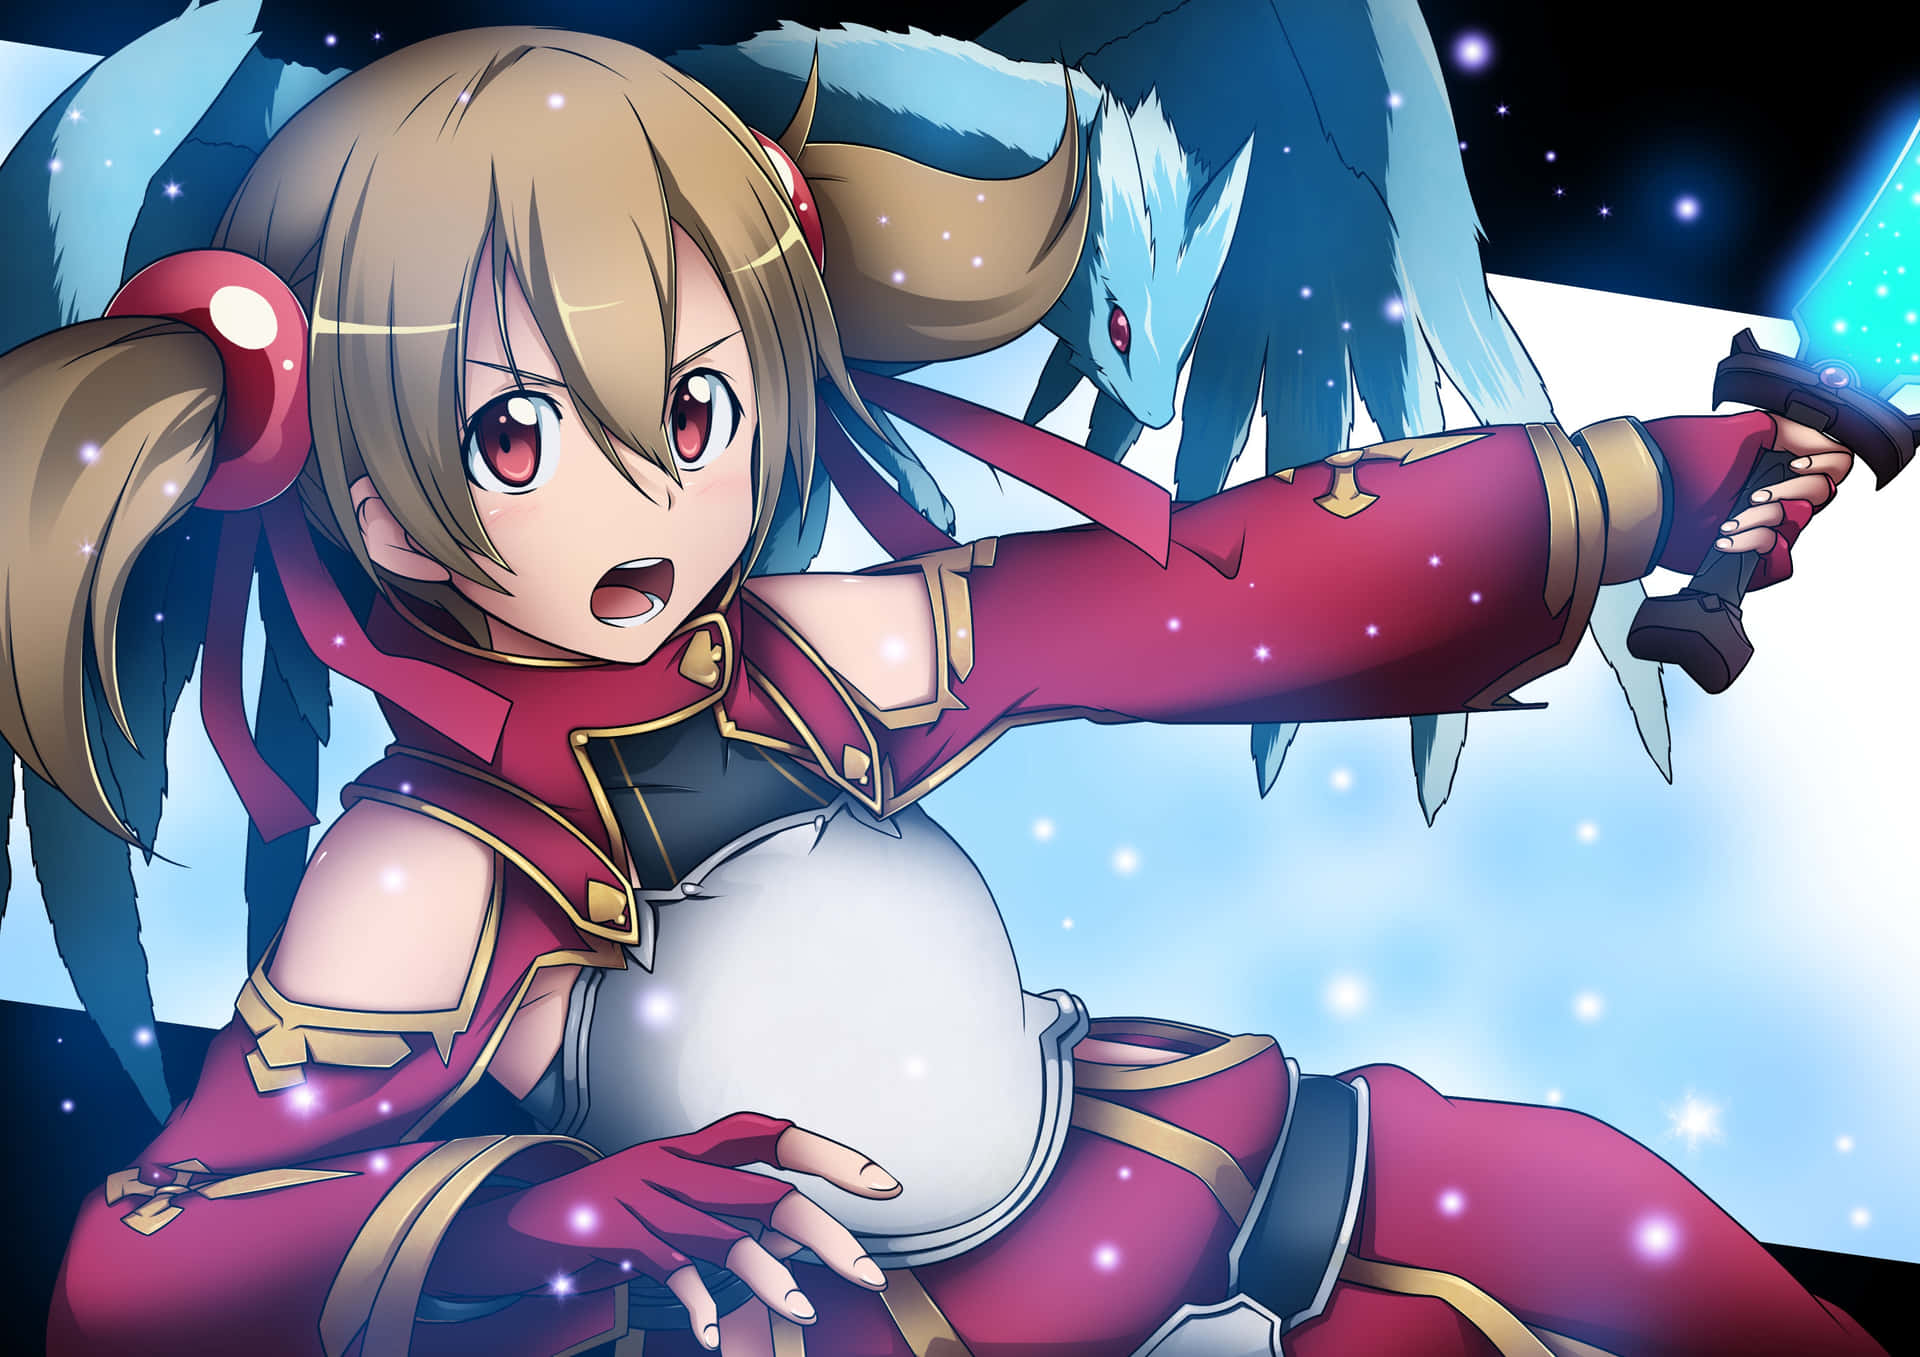 Silica from Sword Art Online with her loyal companion Pina Wallpaper